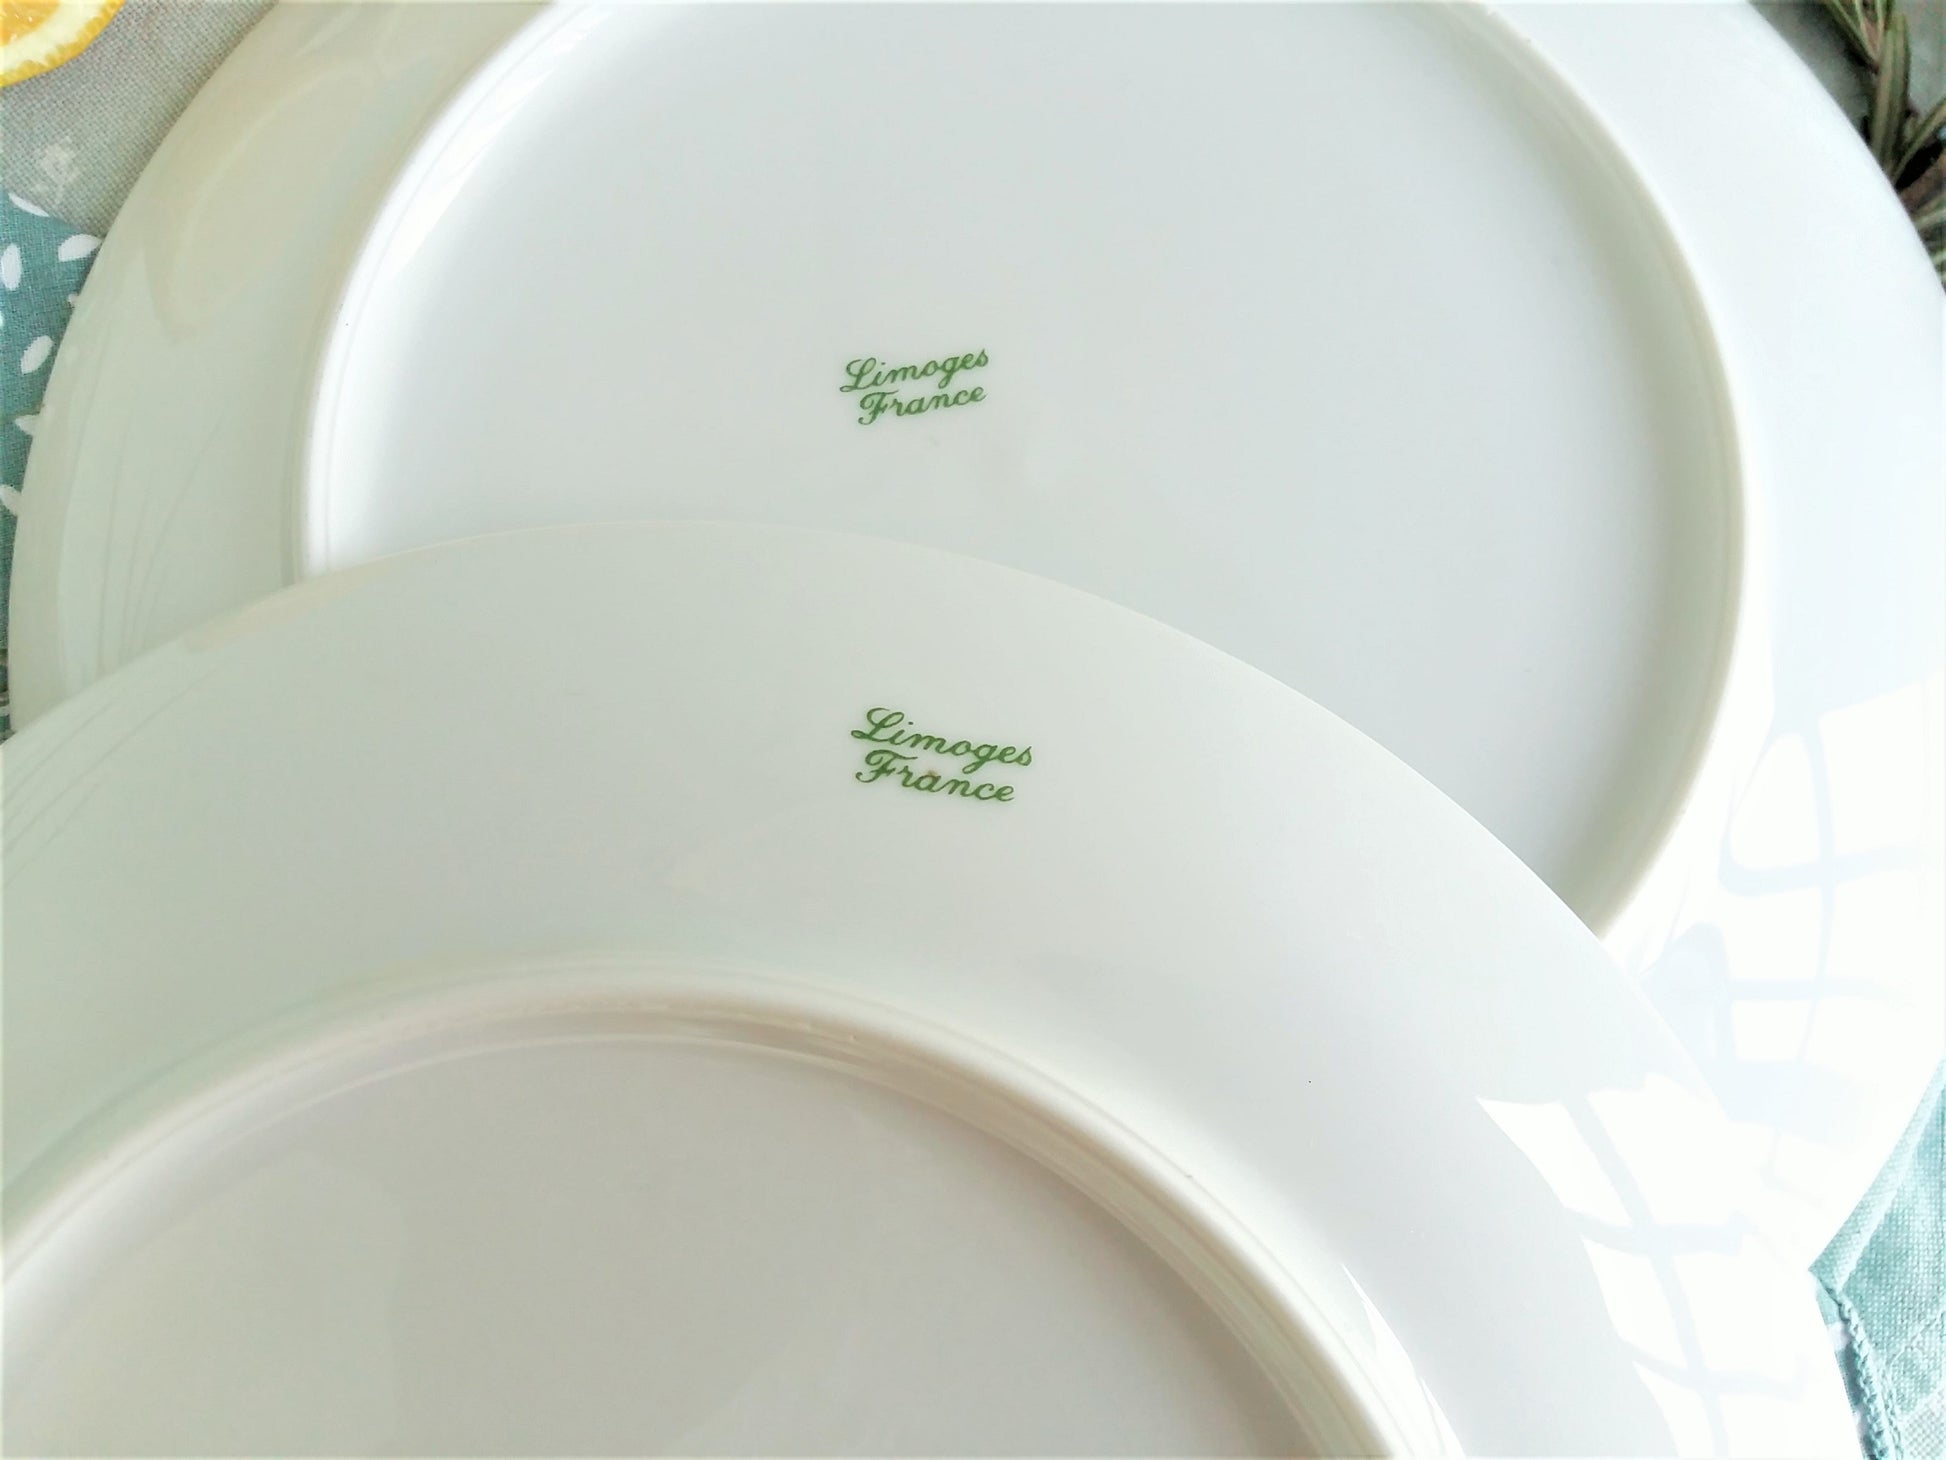 FOUR Limoges Plates for Moules with Large Serving Bowl. from Tiggy & Pip - €189.00! Shop now at Tiggy and Pip